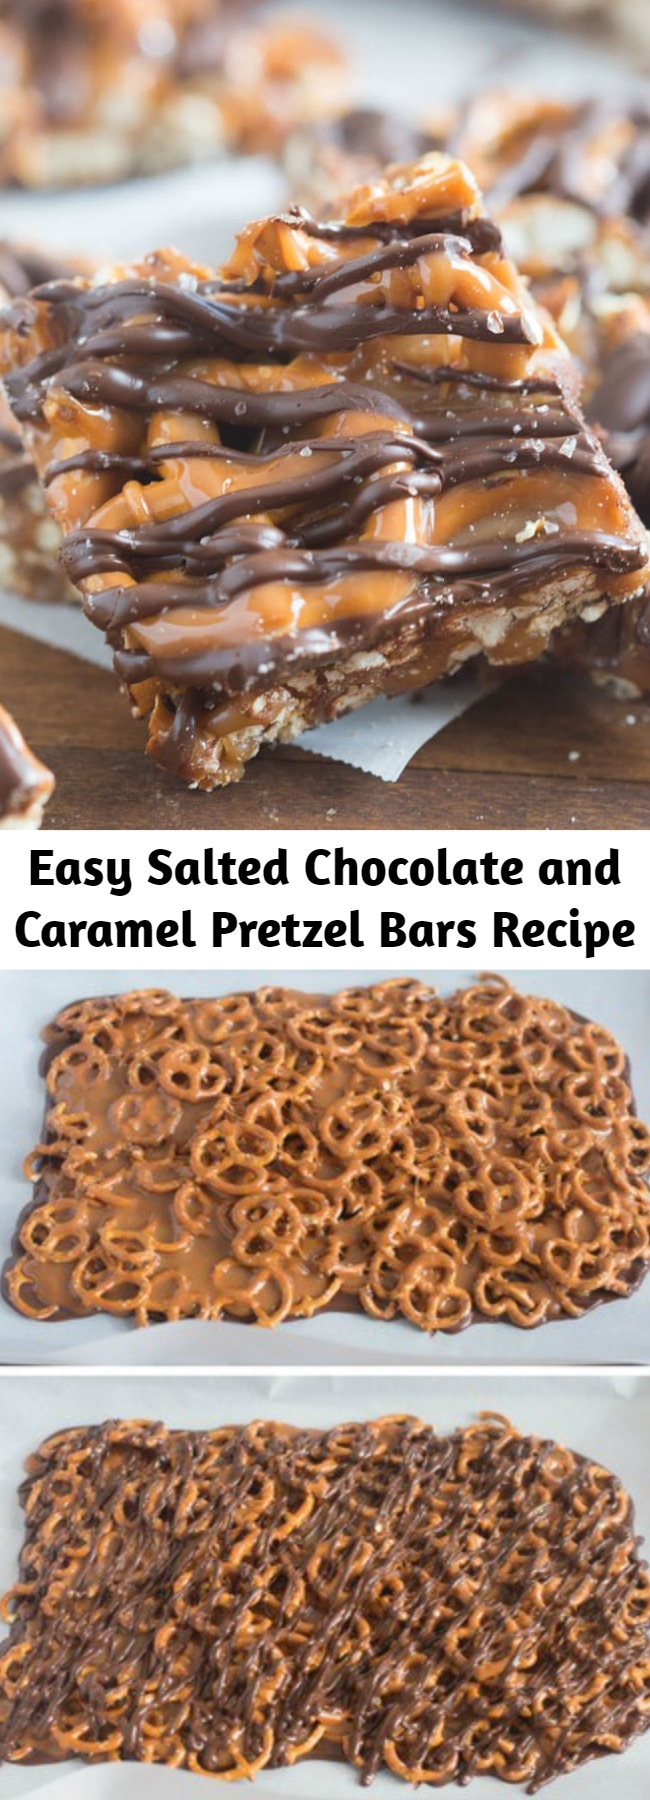 Easy Salted Chocolate and Caramel Pretzel Bars Recipe - These simple, 4-ingredient Salted Chocolate Caramel Pretzel Bars will quickly become your new favorite sweet and salty treat! No bake and no candy thermometer needed.